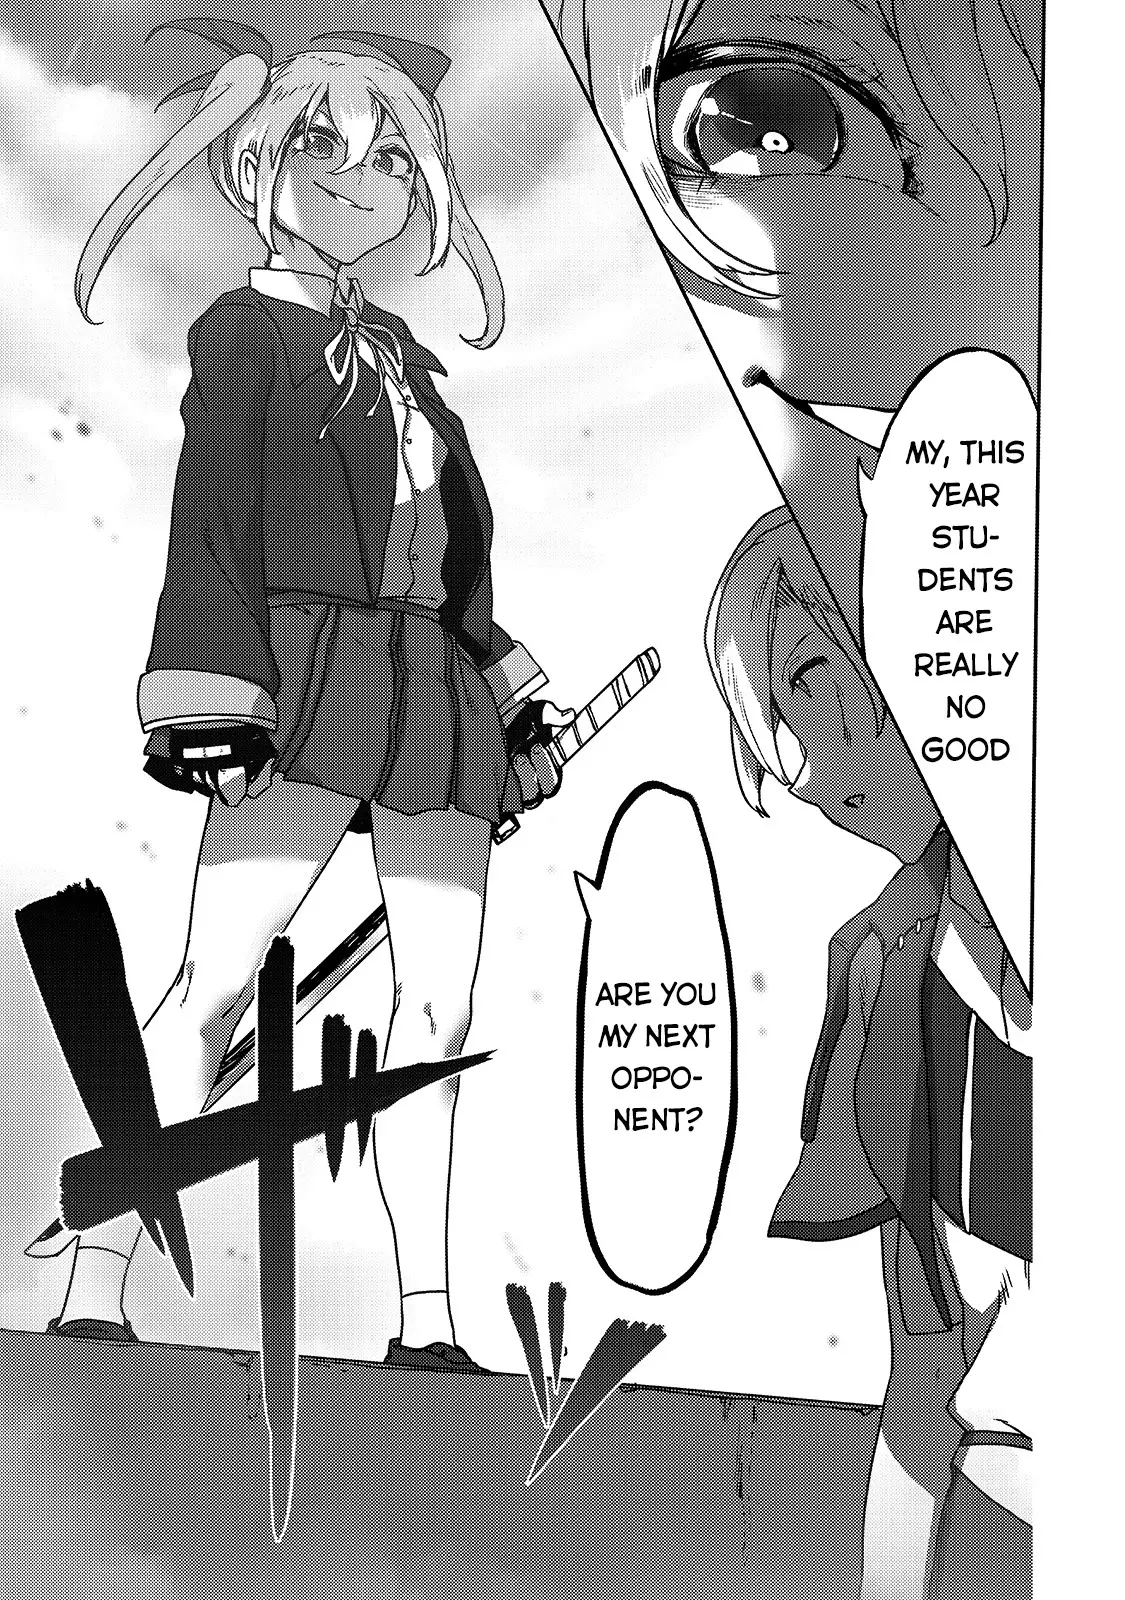 The Useless Tamer Will Turn Into The Top Unconsciously By My Previous Life Knowledge - 8 page 10